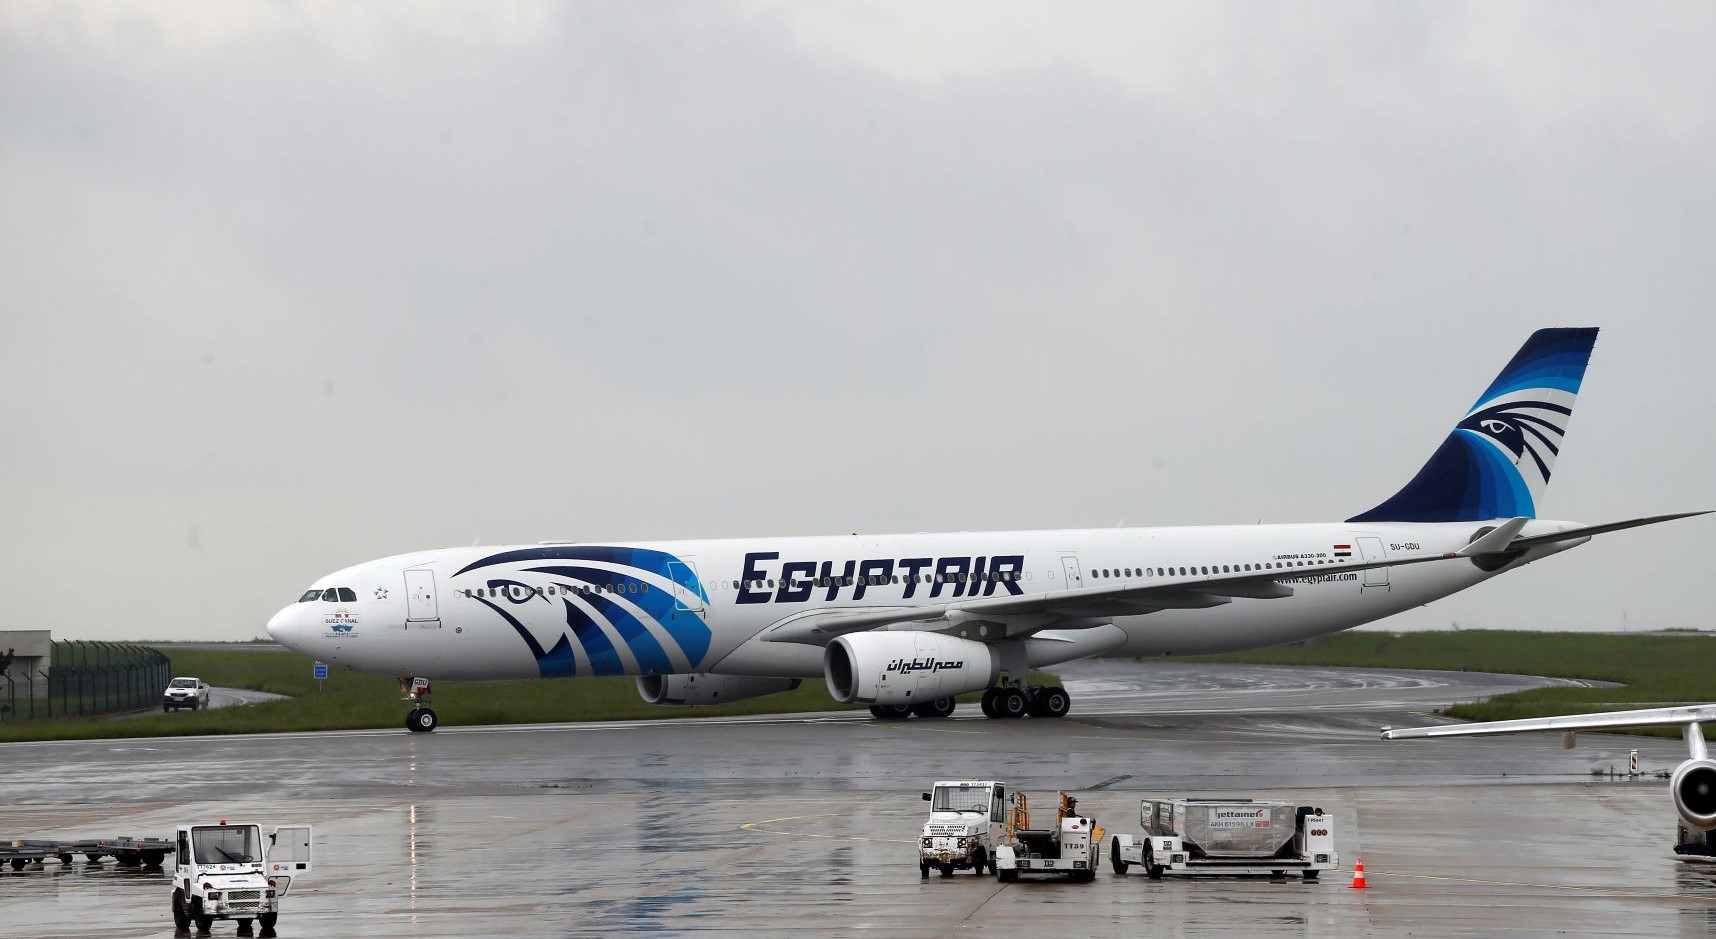 EgyptAir is set to operate three flights a week between the two capital cities starting in December this year. (AFP)